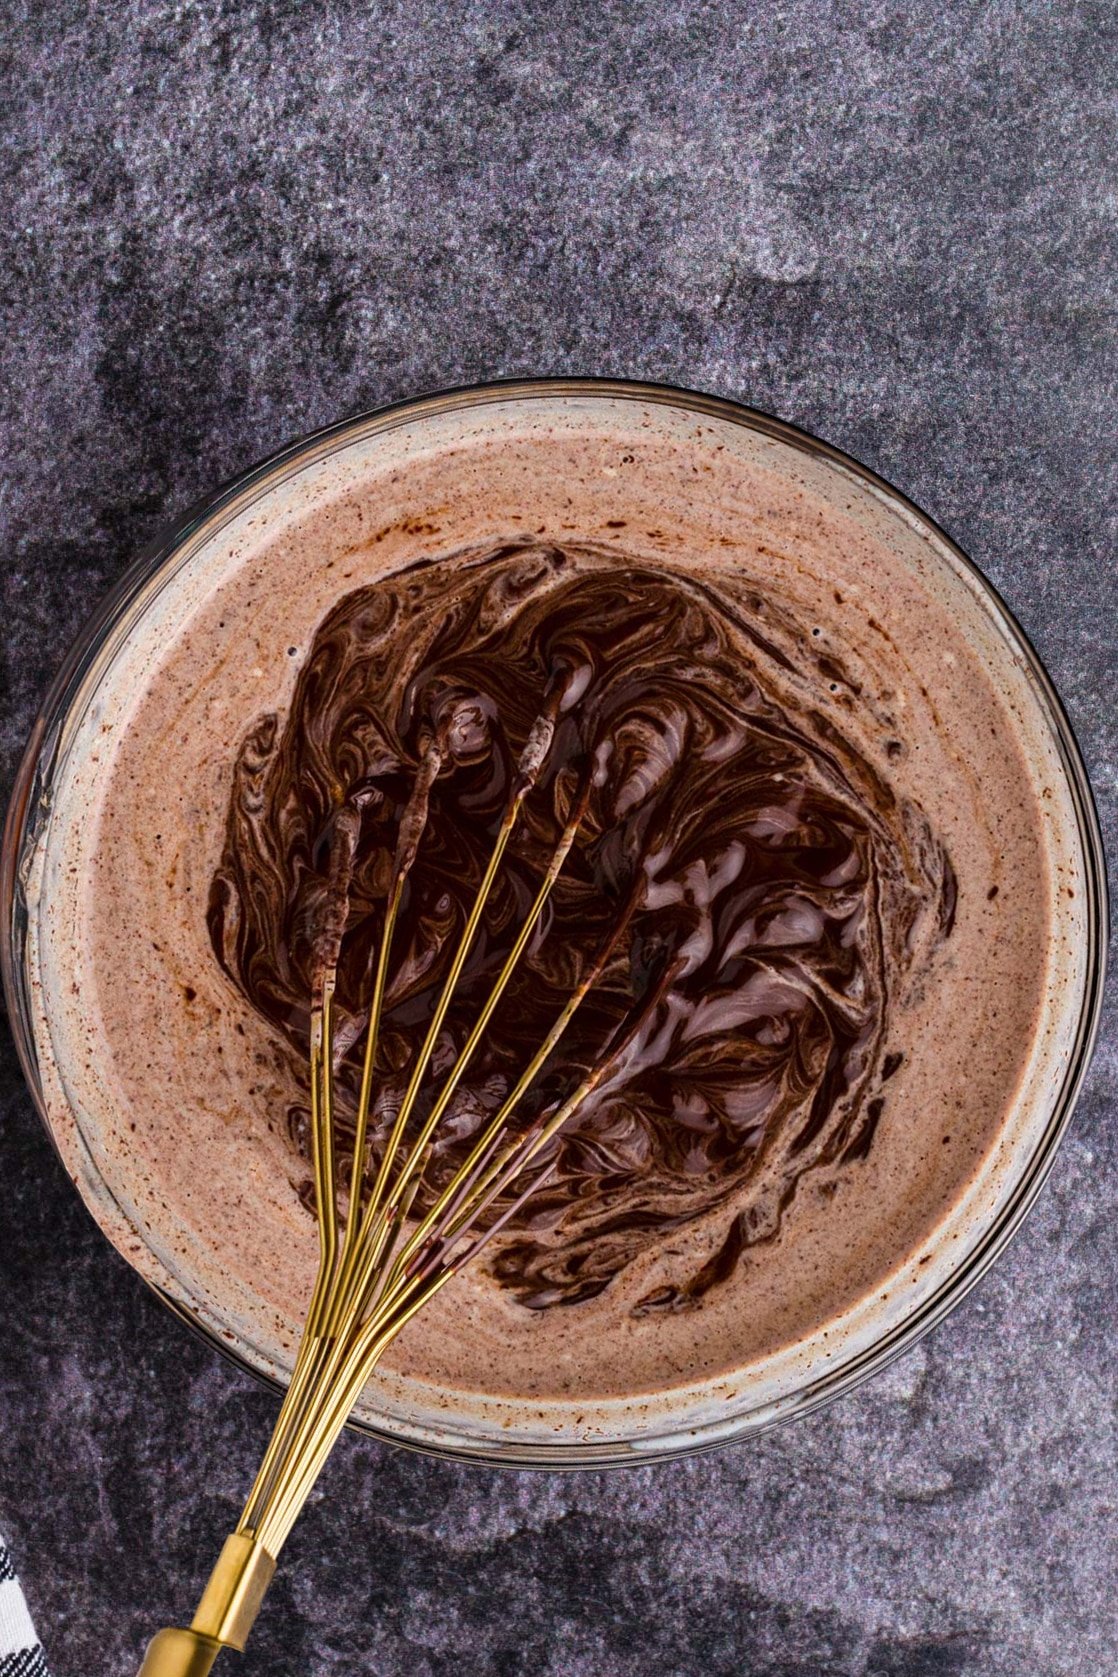 Dark Chocolate Ganache being stirred in a mixing bowl with a whisk.